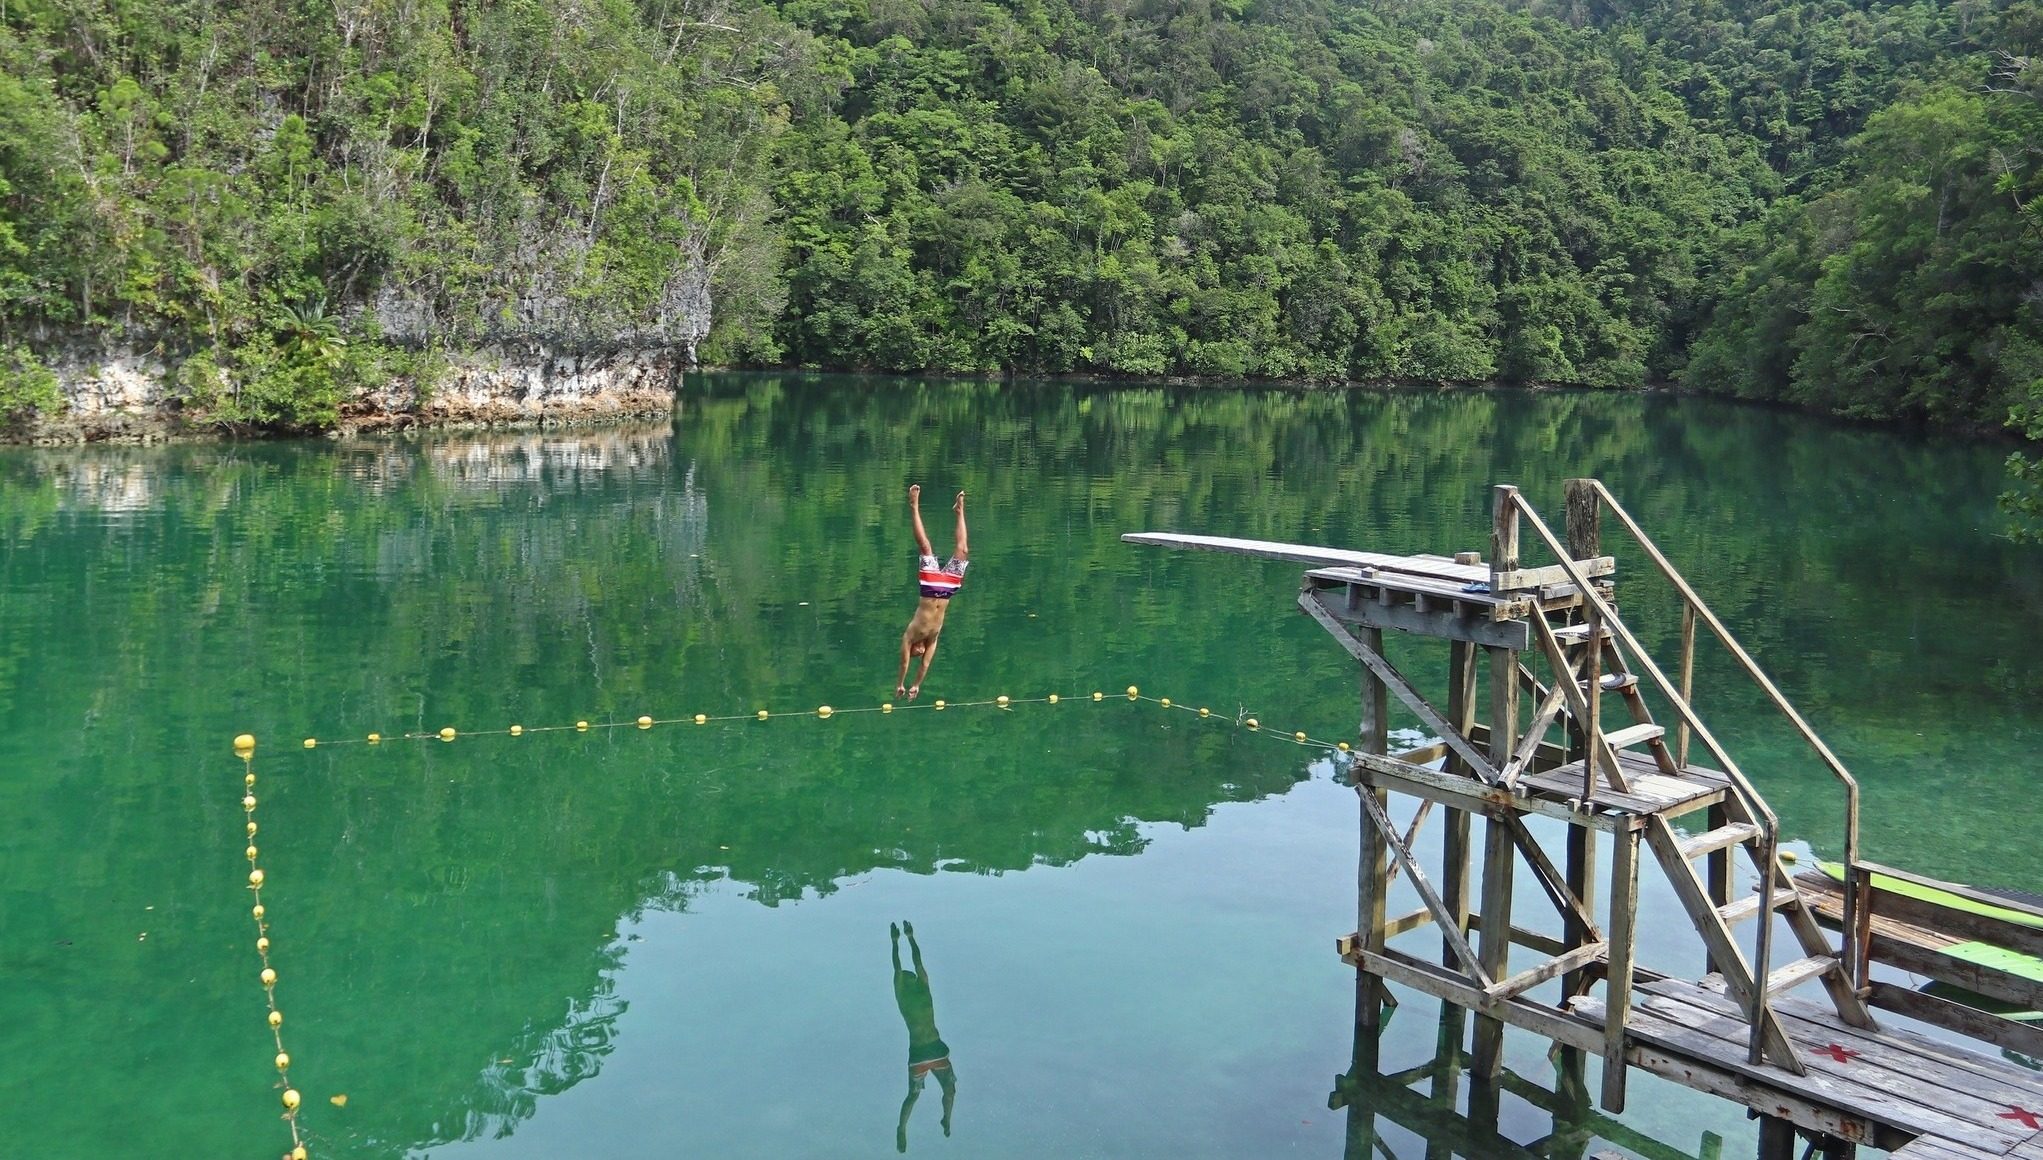 Siargao’s famous Sugba Lagoon closed for month-long breather